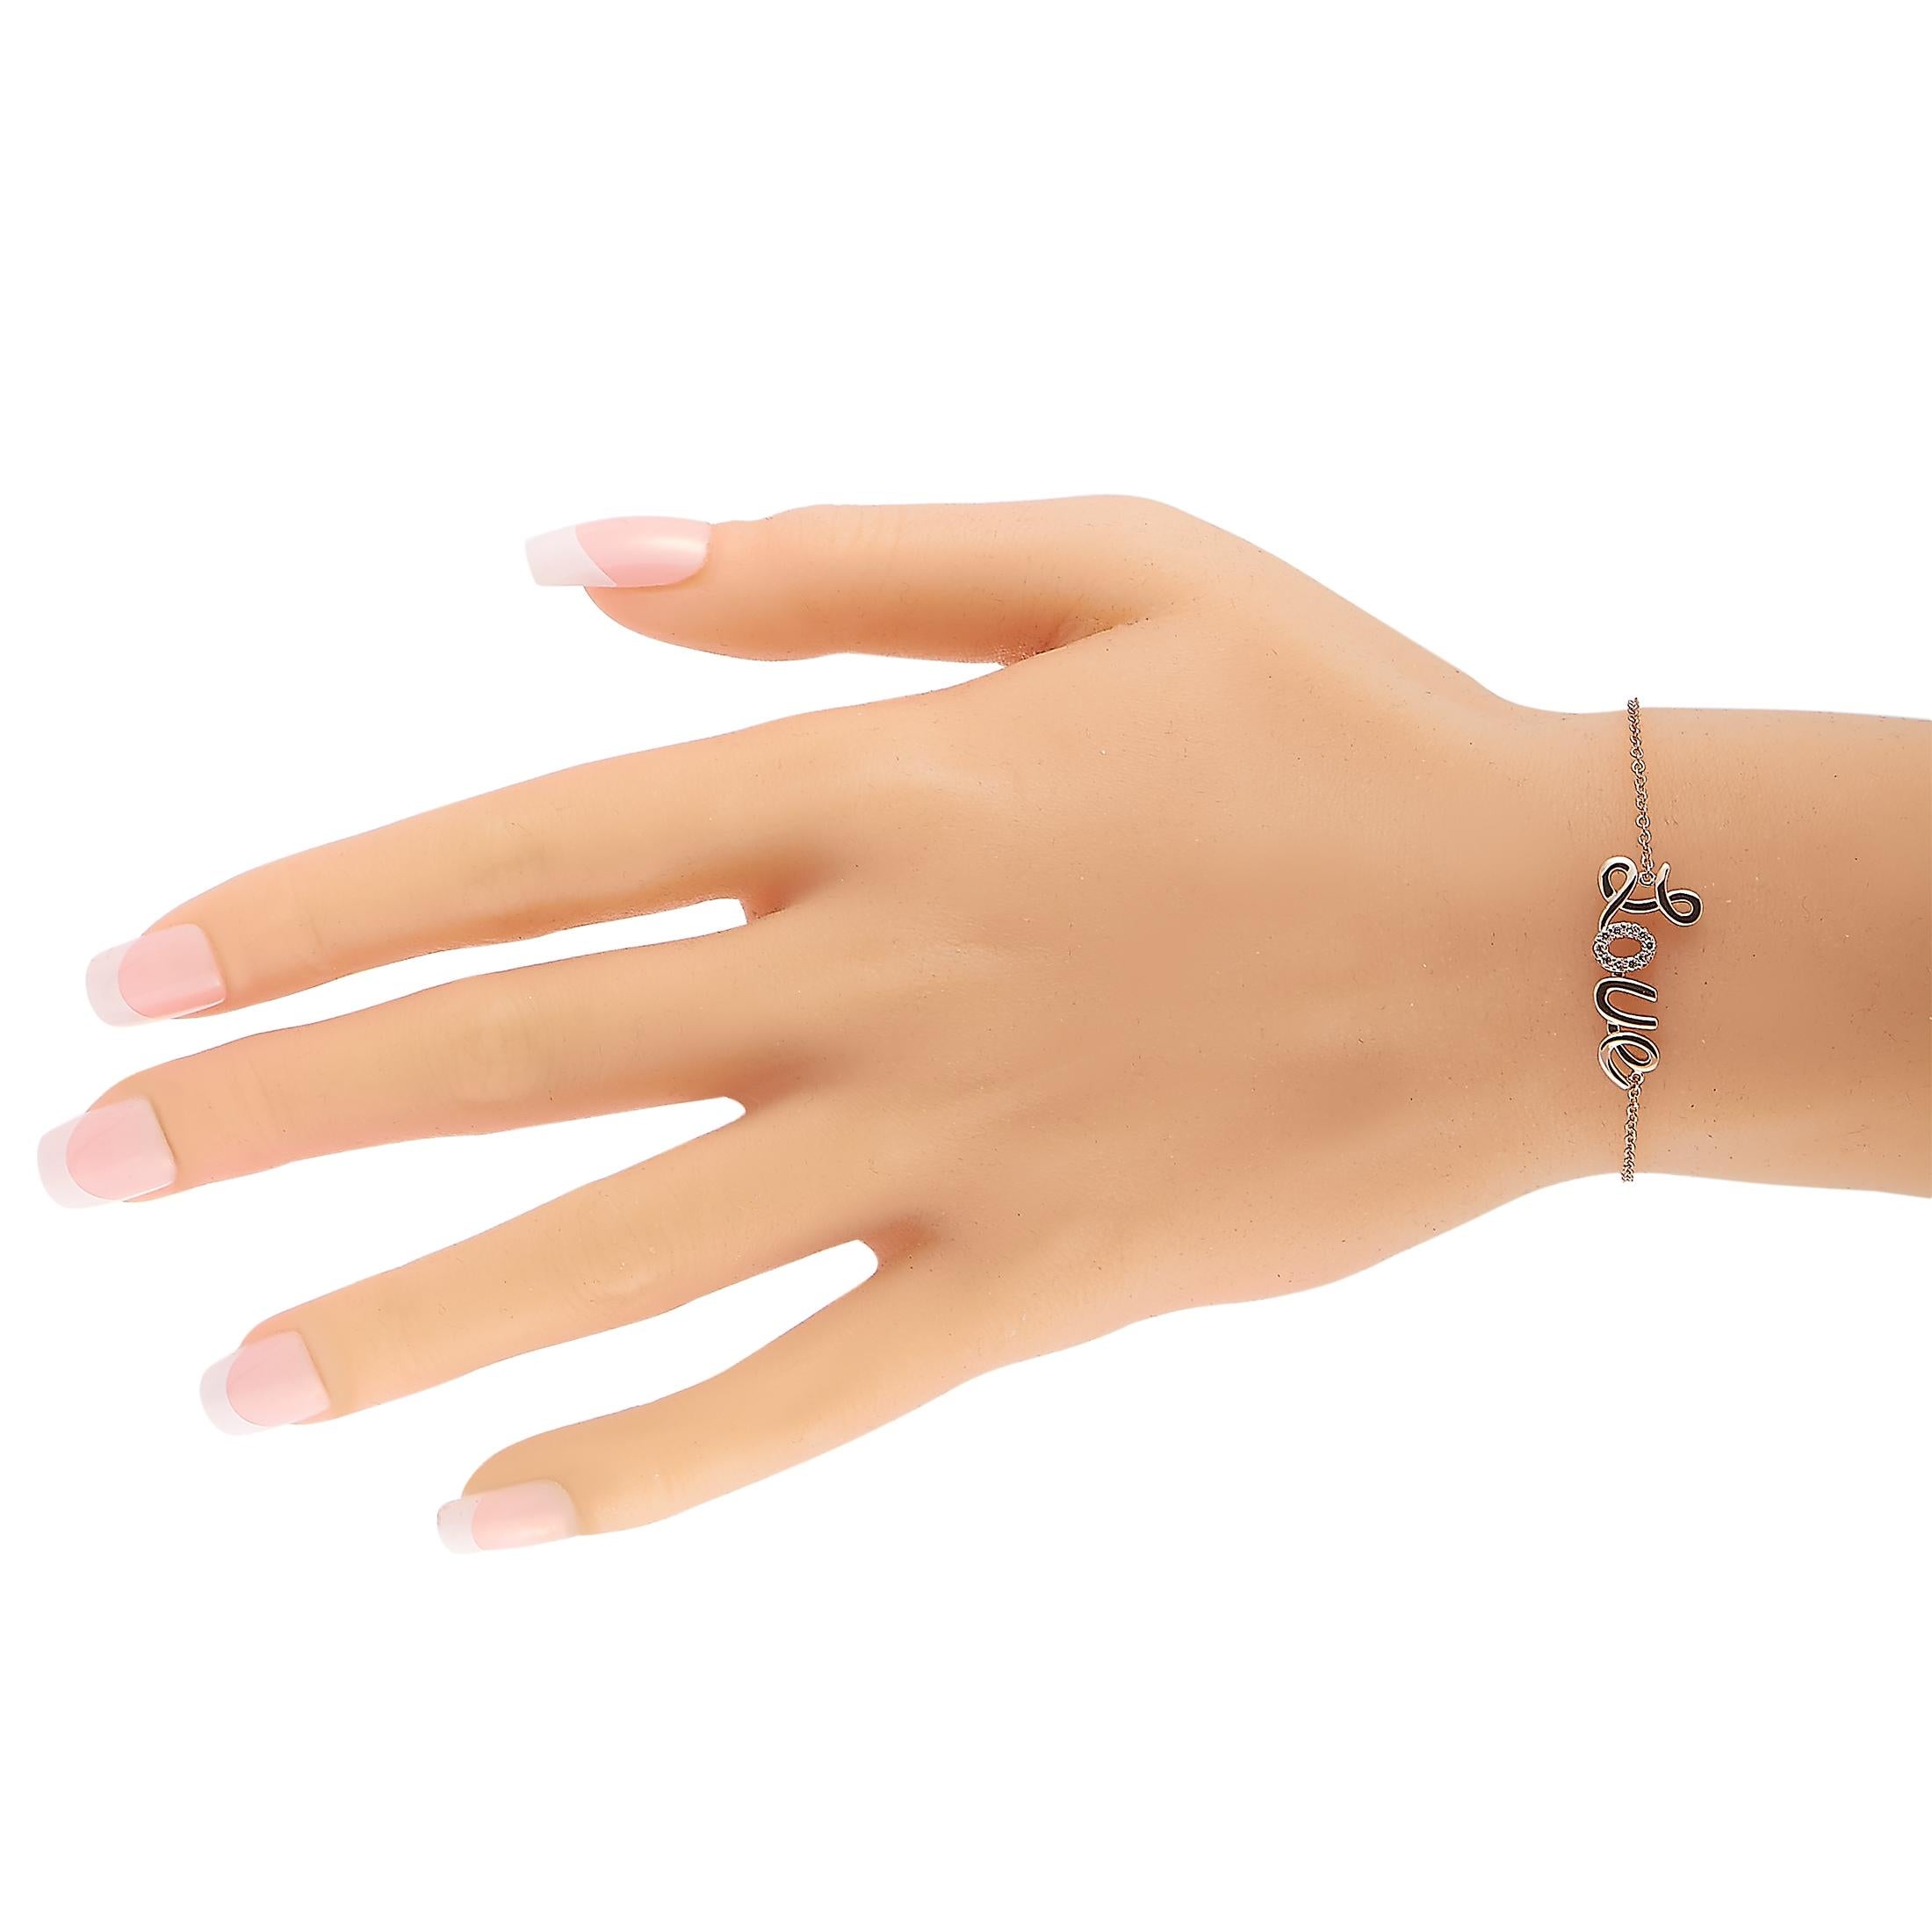 This LB Exclusive love bracelet is crafted from 14K rose gold and weighs 2.9 grams, measuring 7” in length. The bracelet is set with diamonds that total 0.10 carats.
 
 Offered in brand new condition, this item includes a gift box.